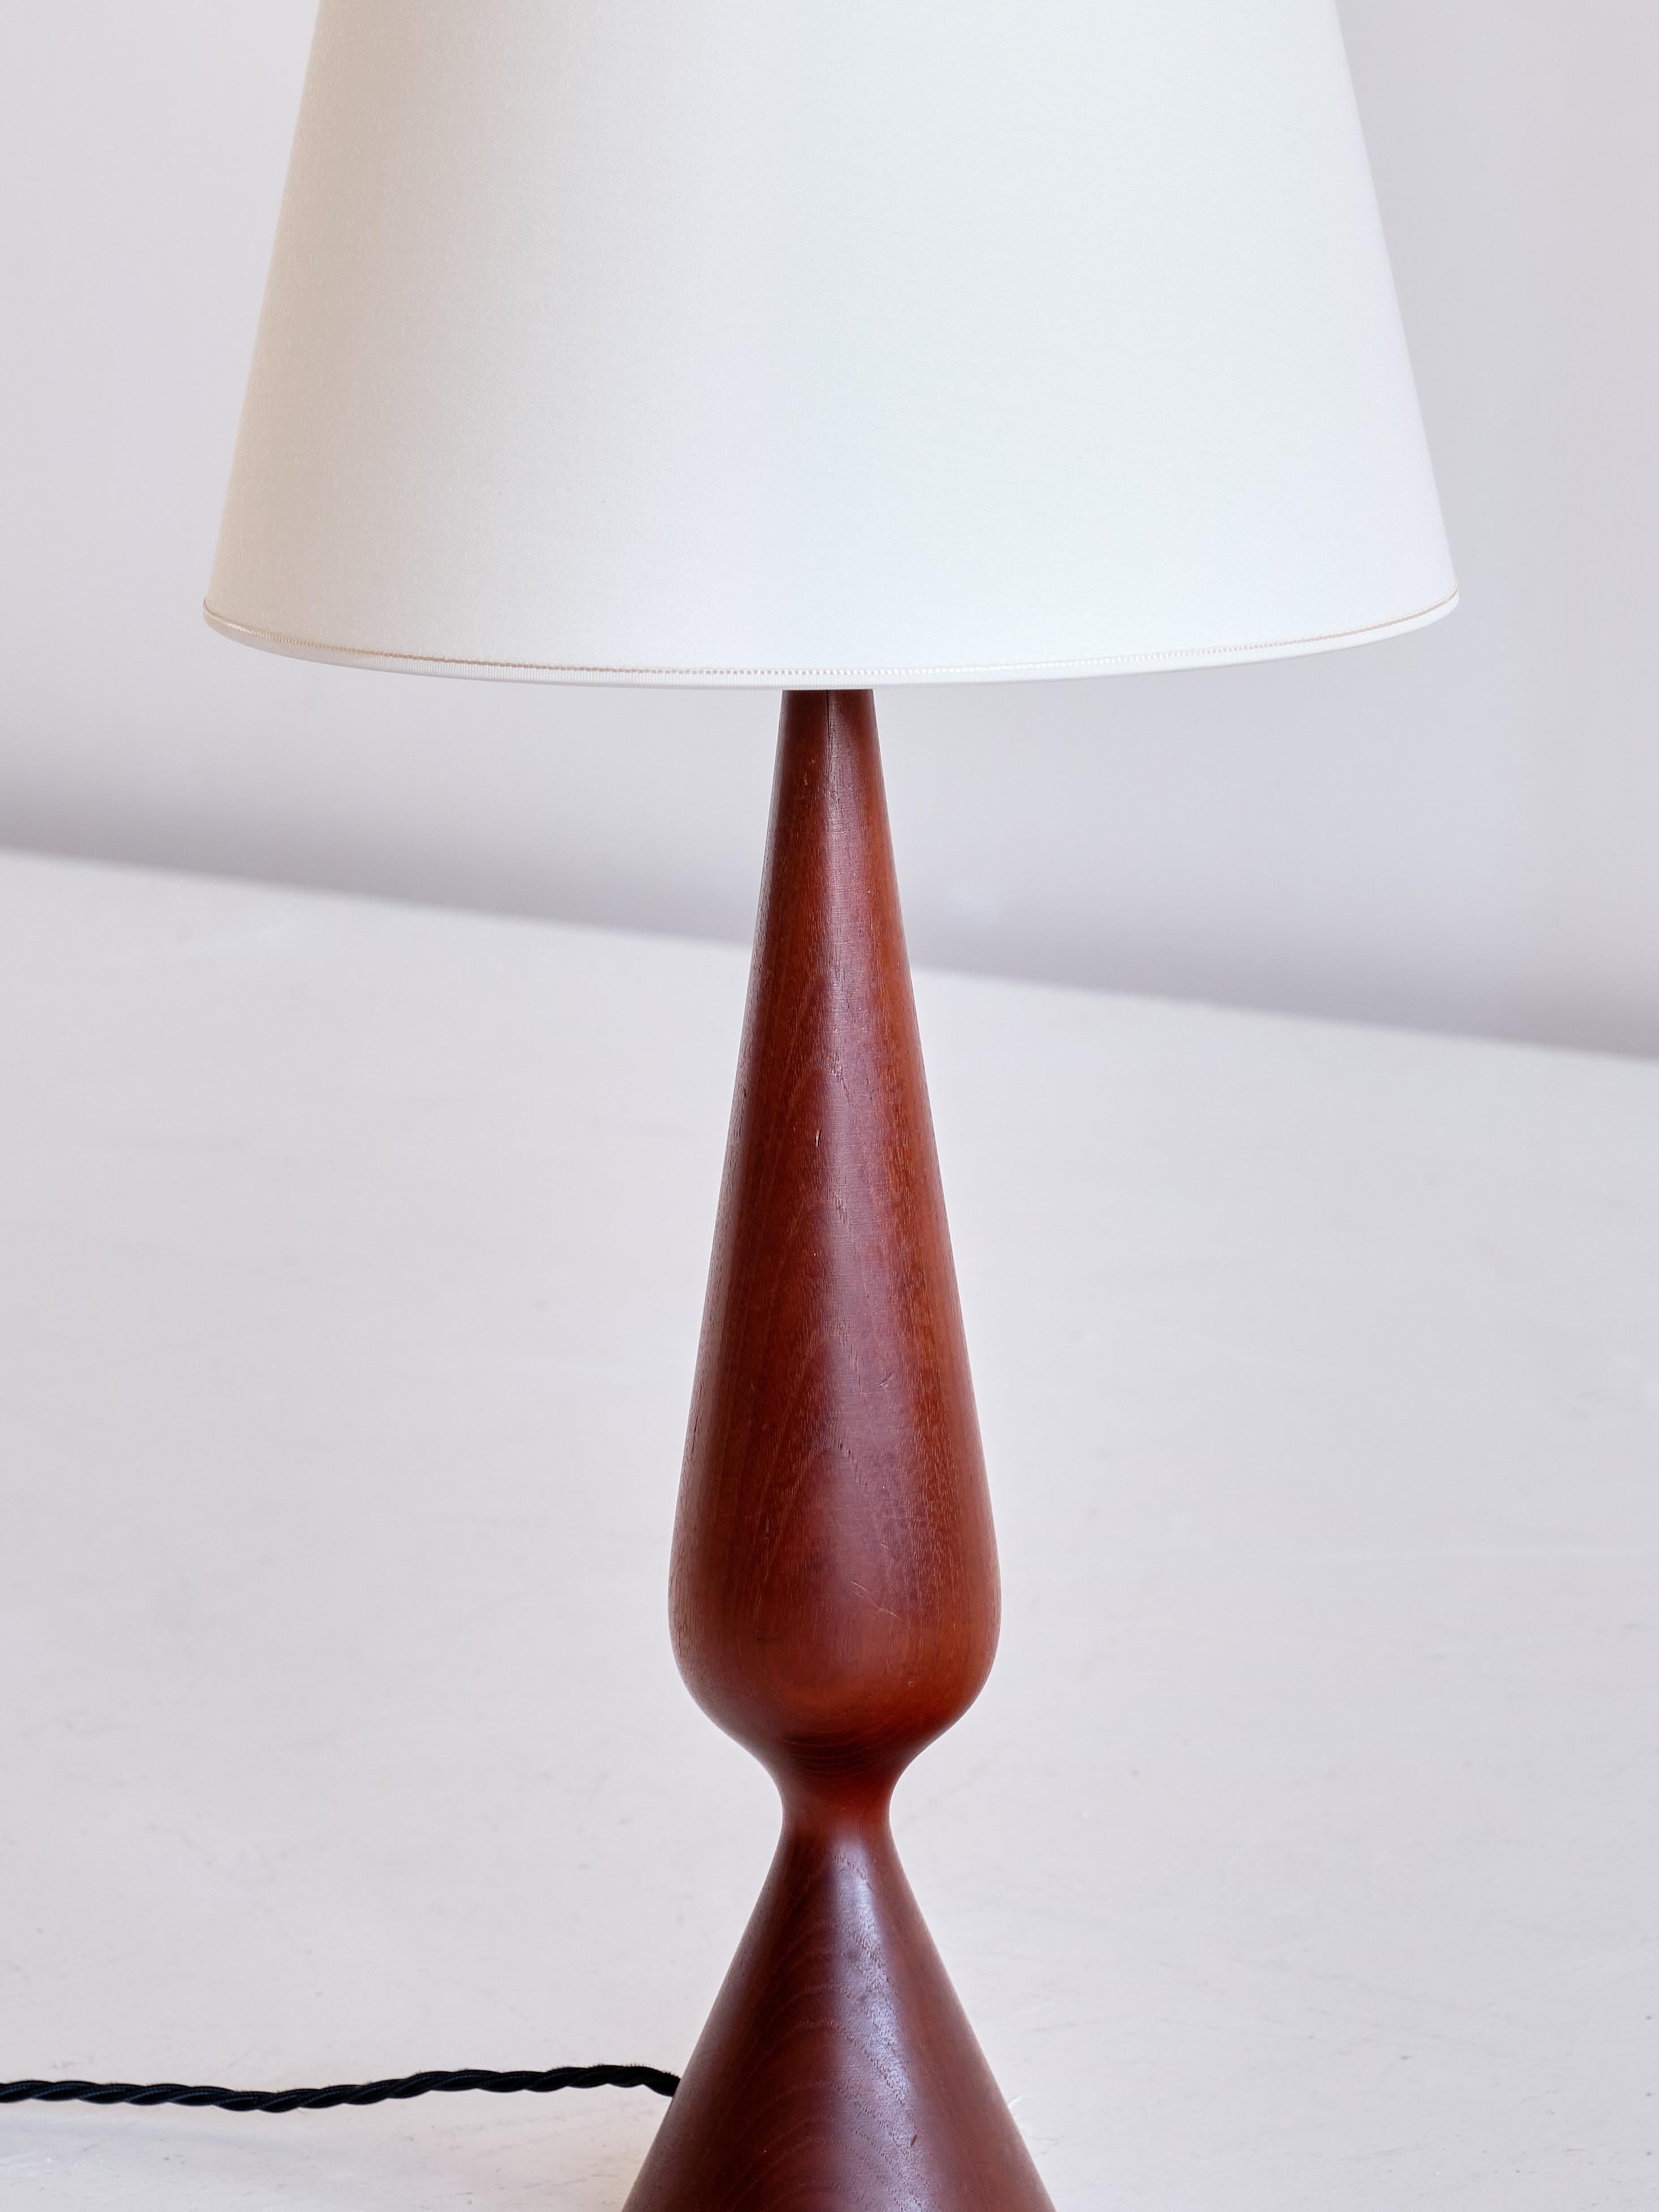 Sculptural Table Lamp in Teak Wood and Ivory Drum Shade, Denmark, 1960s In Good Condition For Sale In The Hague, NL